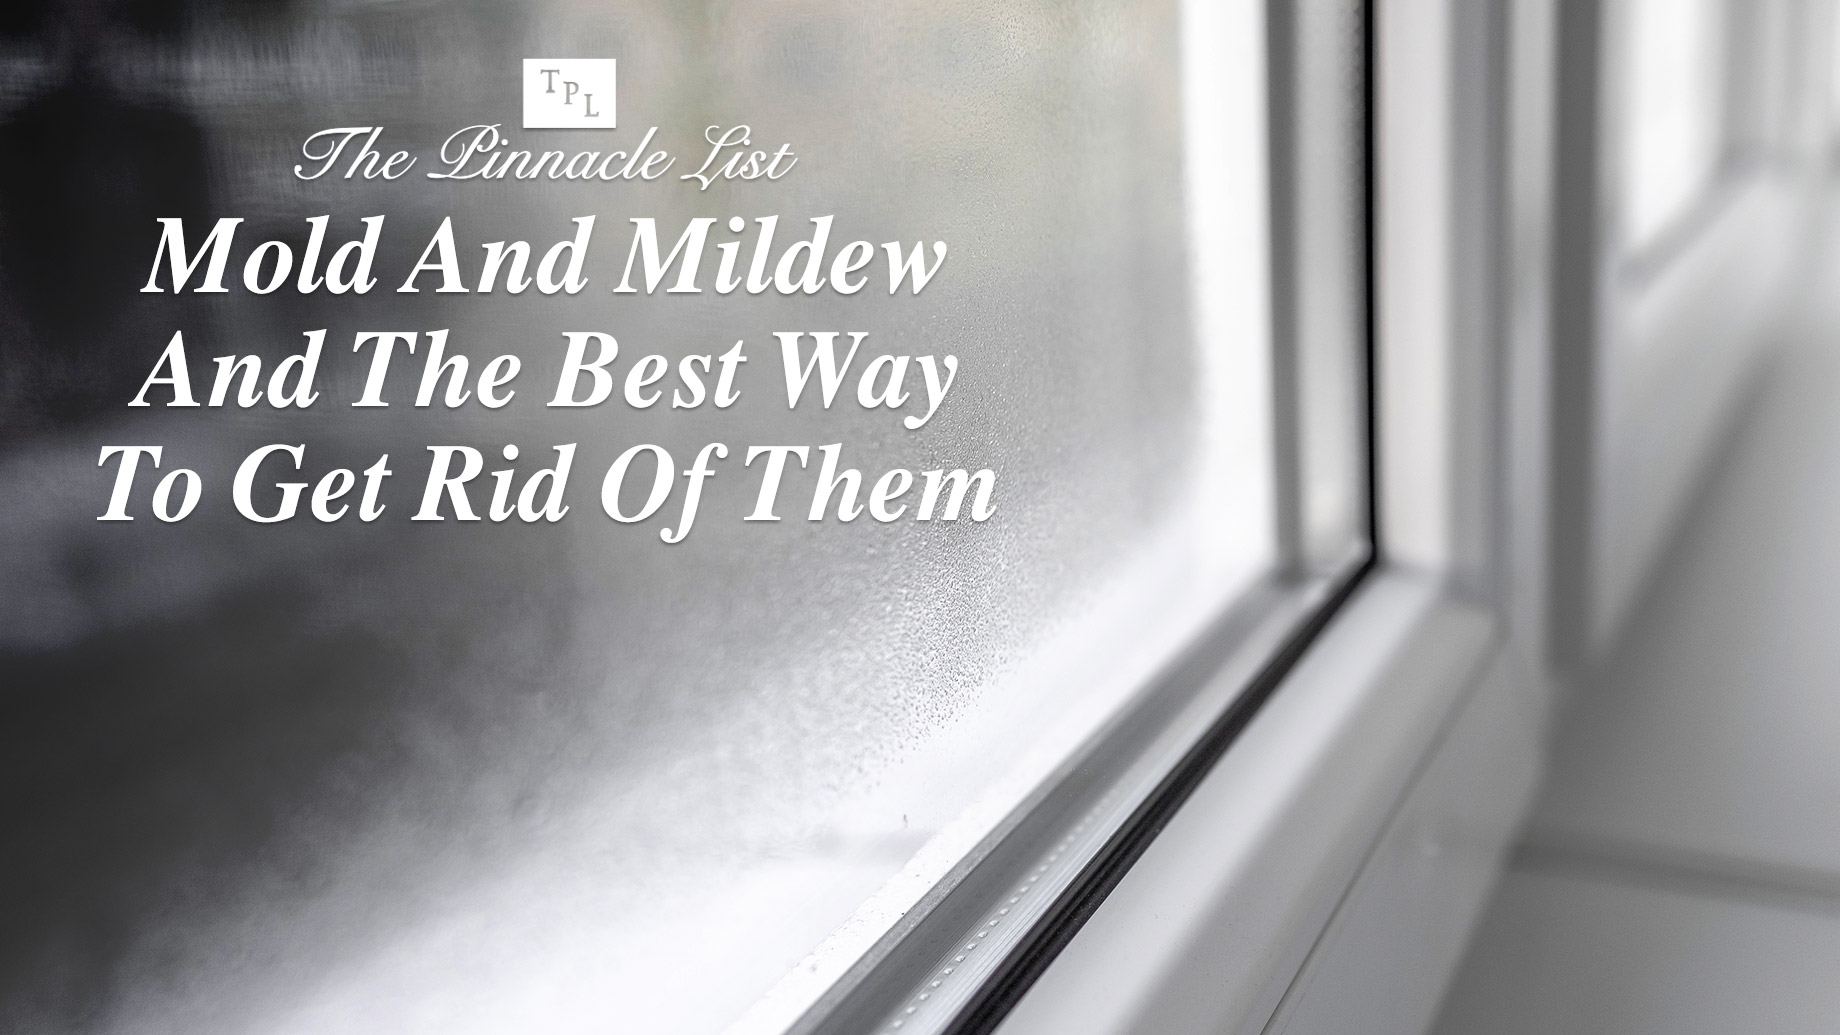 Mold And Mildew And The Best Way To Get Rid Of Them